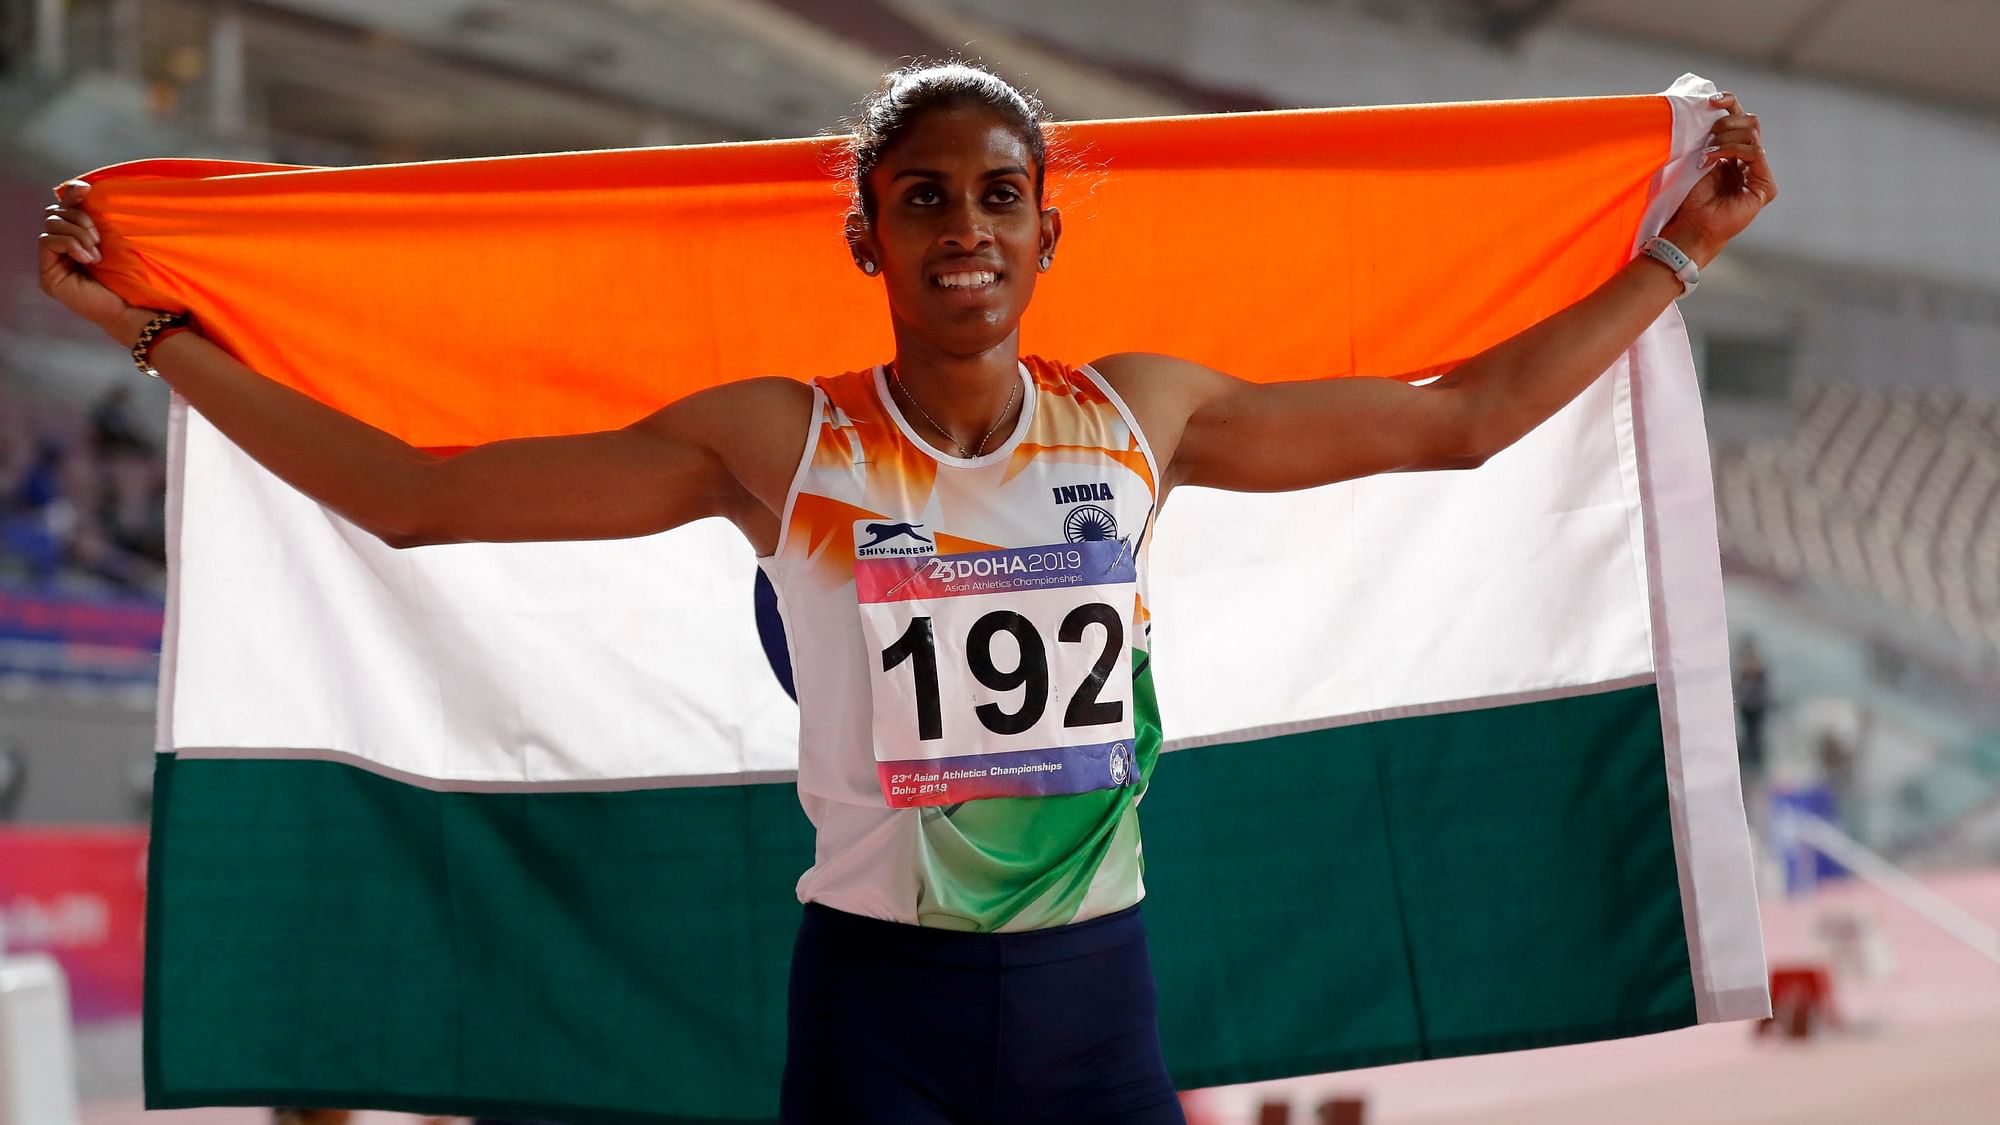 Poovamma Raju celebrates after winning the bronze medal in the women’s 400m final at the 23rd Asian Athletics Championships in Doha.